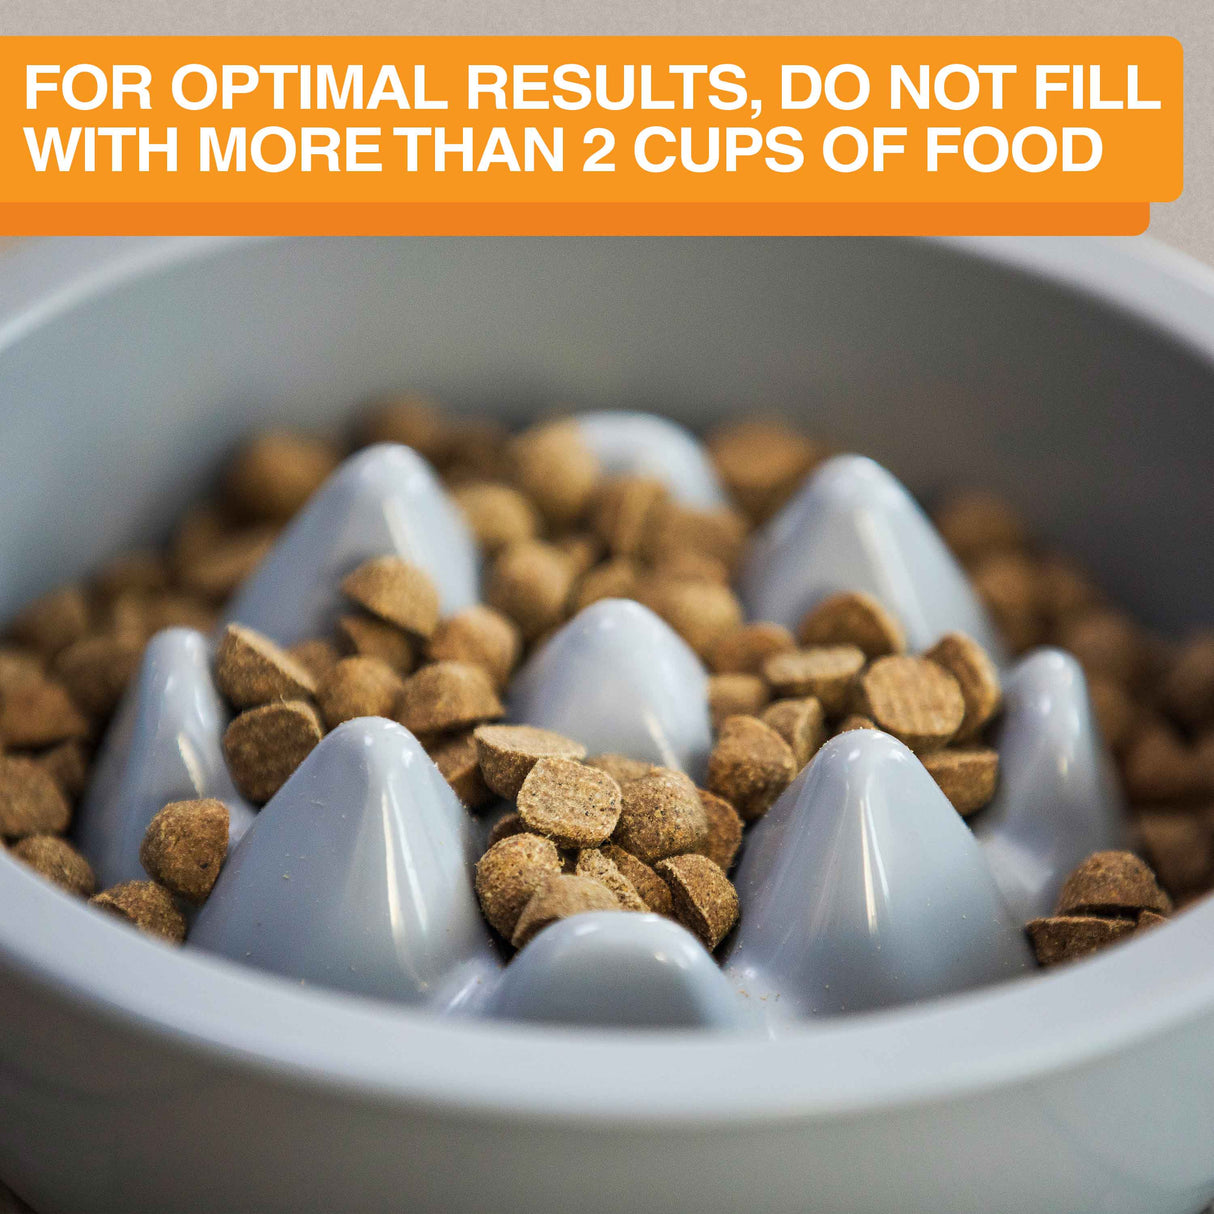 For optimal results do not fill with more than 2 cups of food